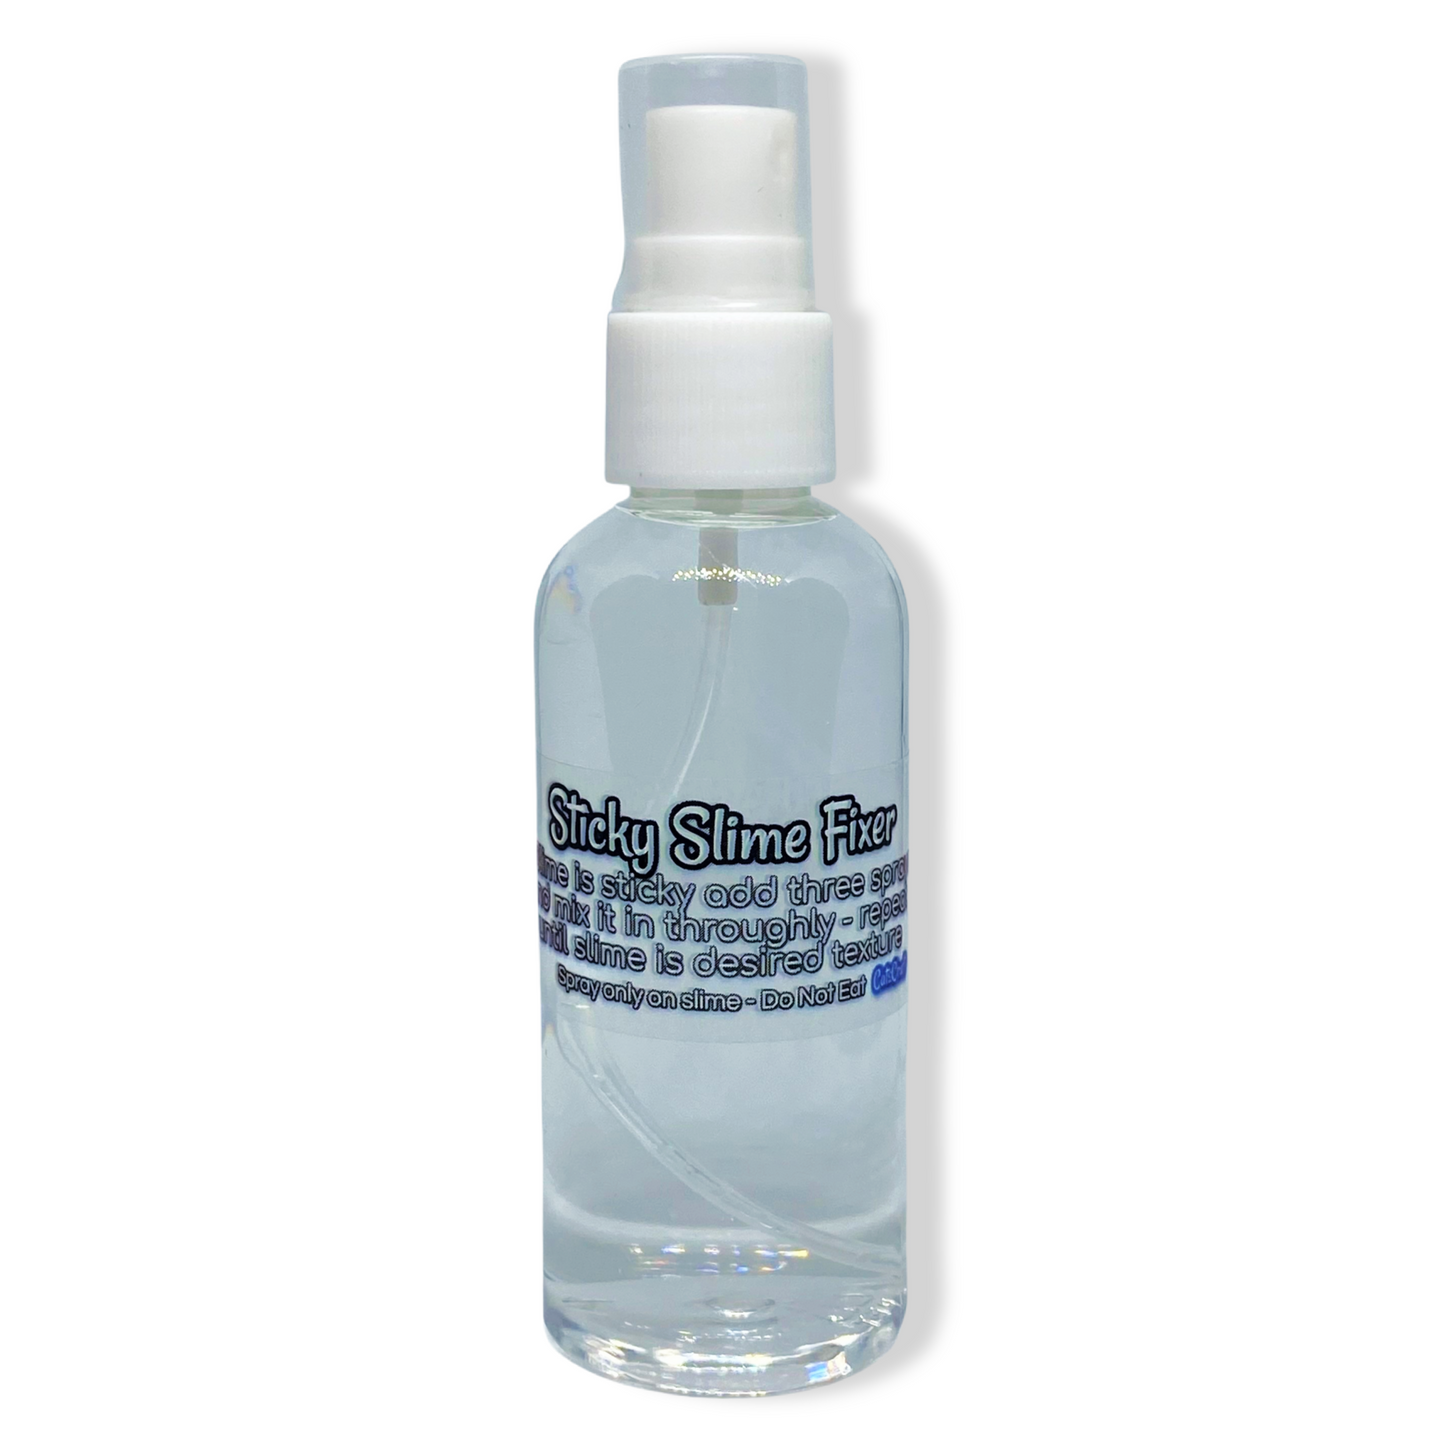 Sticky Slime Fixer Activator Spray Bottle 2.7 oz Borax solution Travel Size Repair On The Go